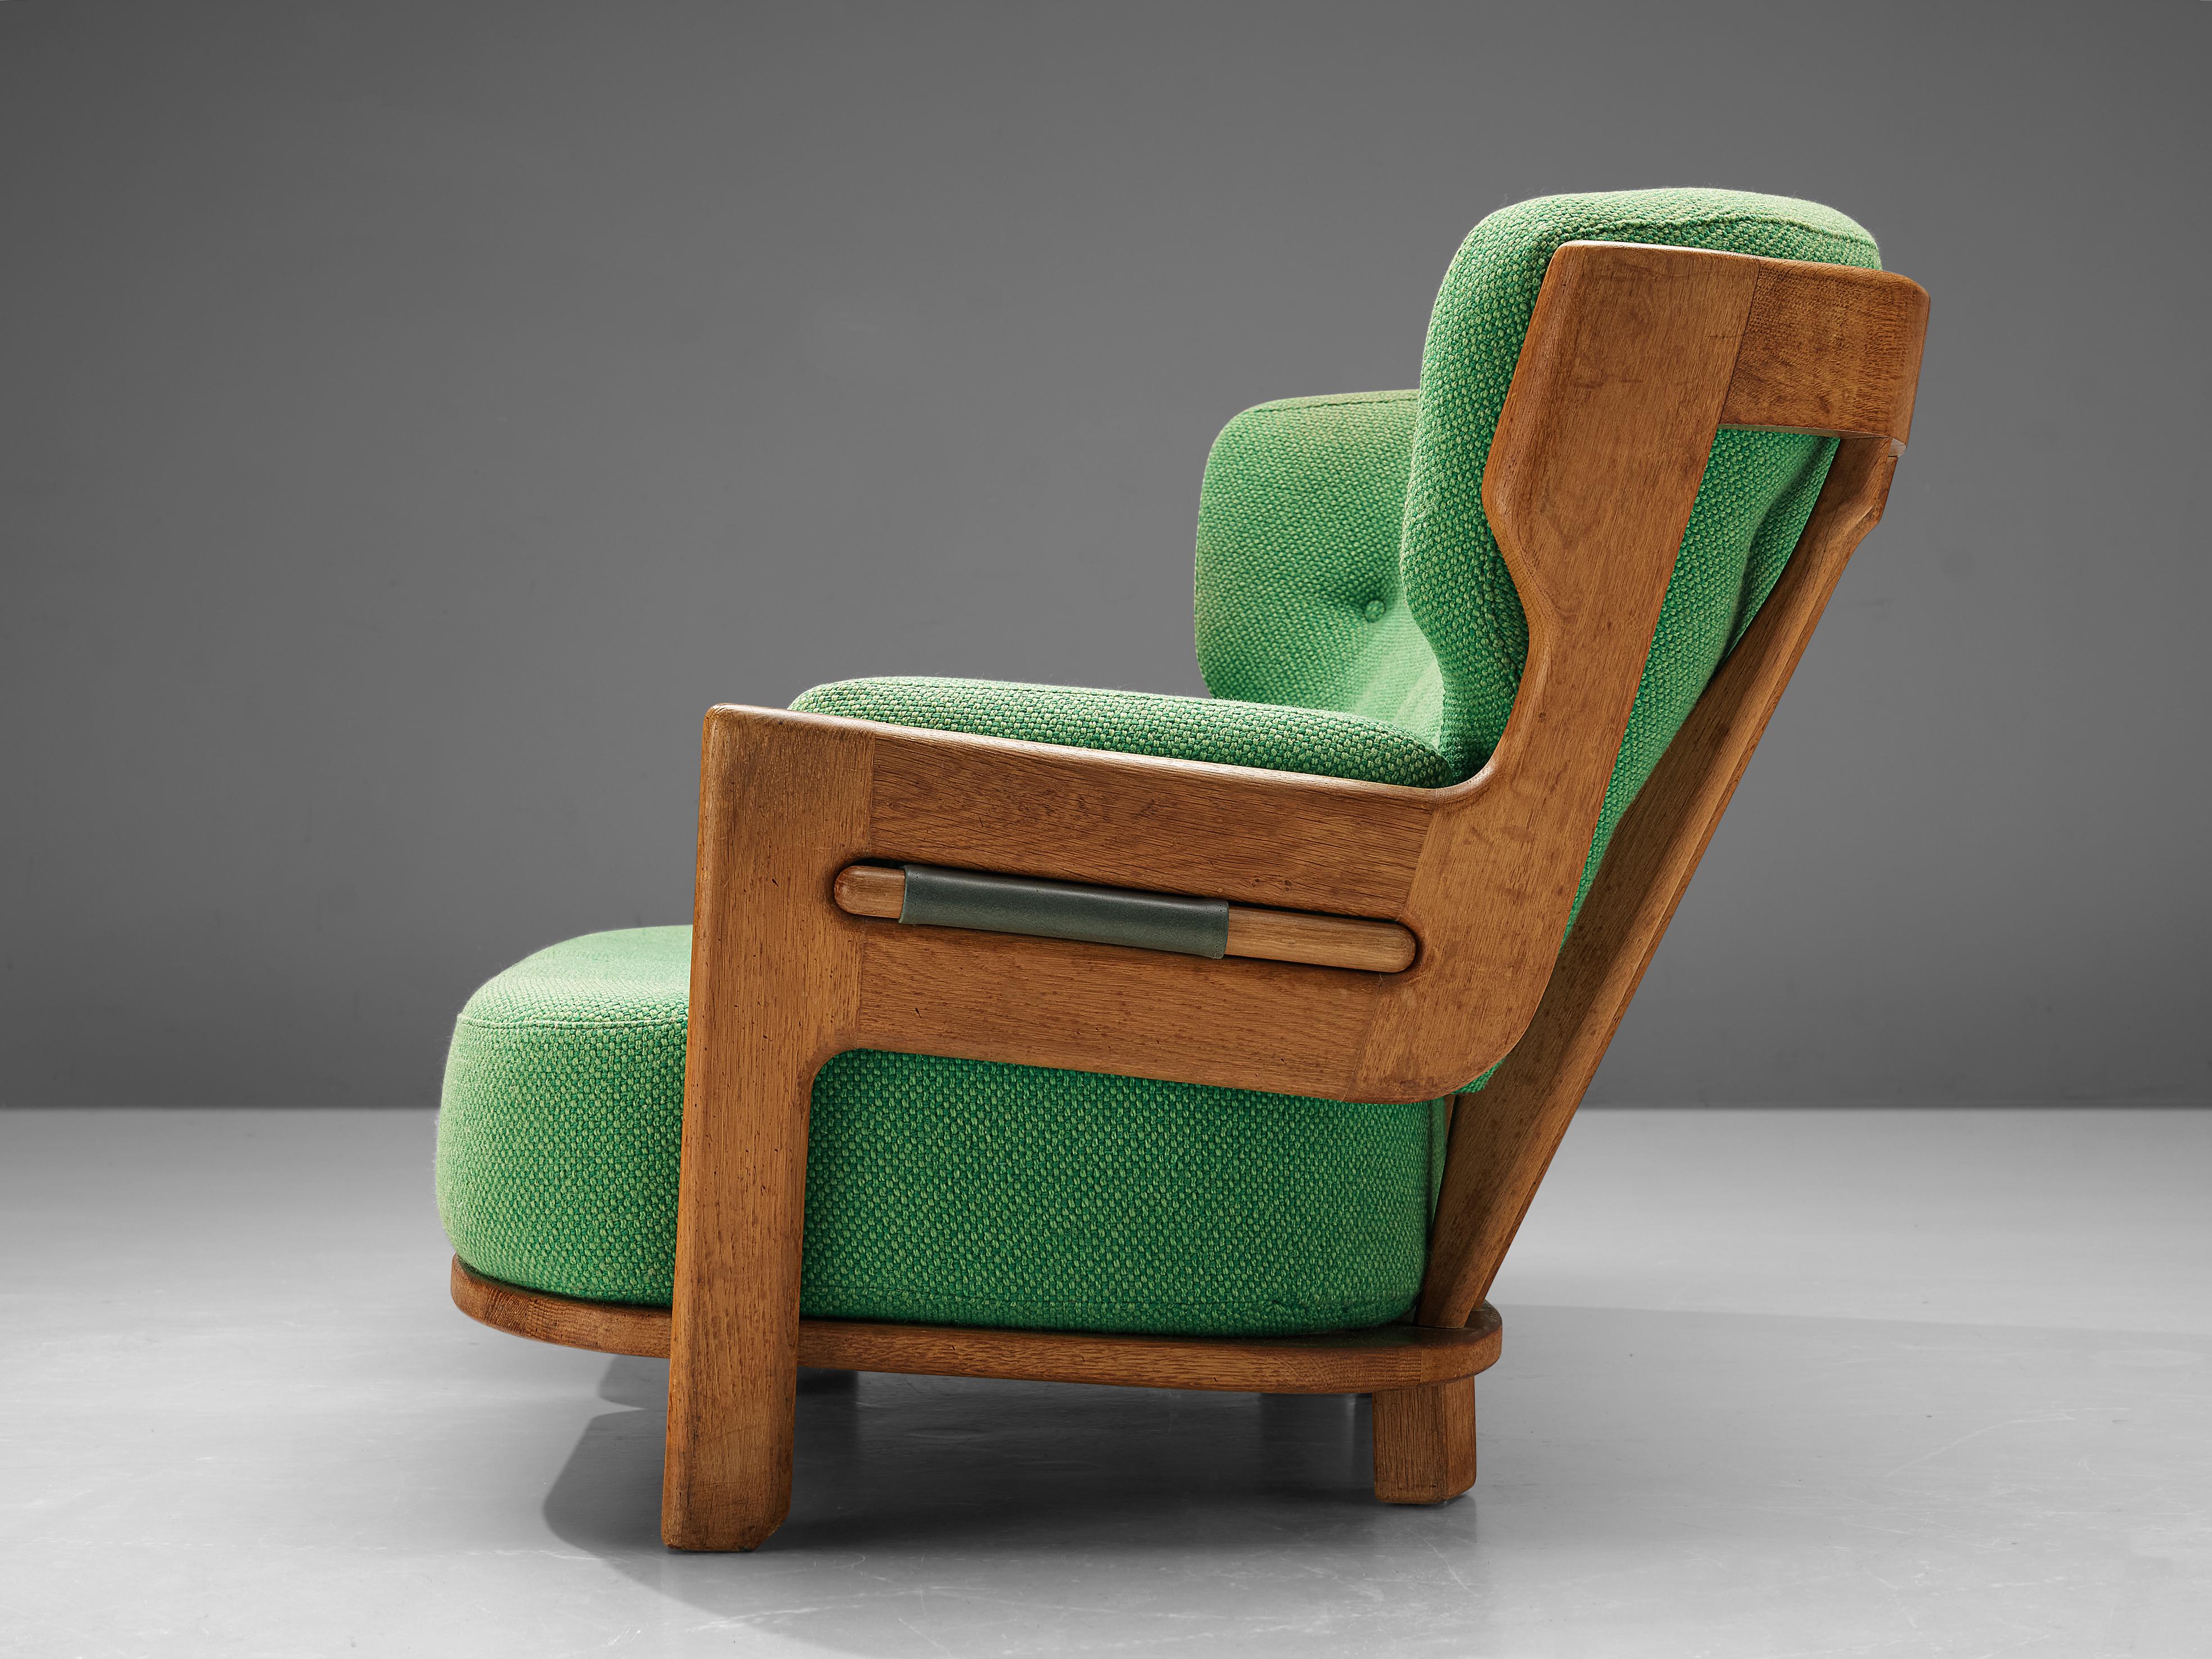 Mid-20th Century Guillerme & Chambron Sofa Model 'Denis' in Solid Oak in Green Upholstery